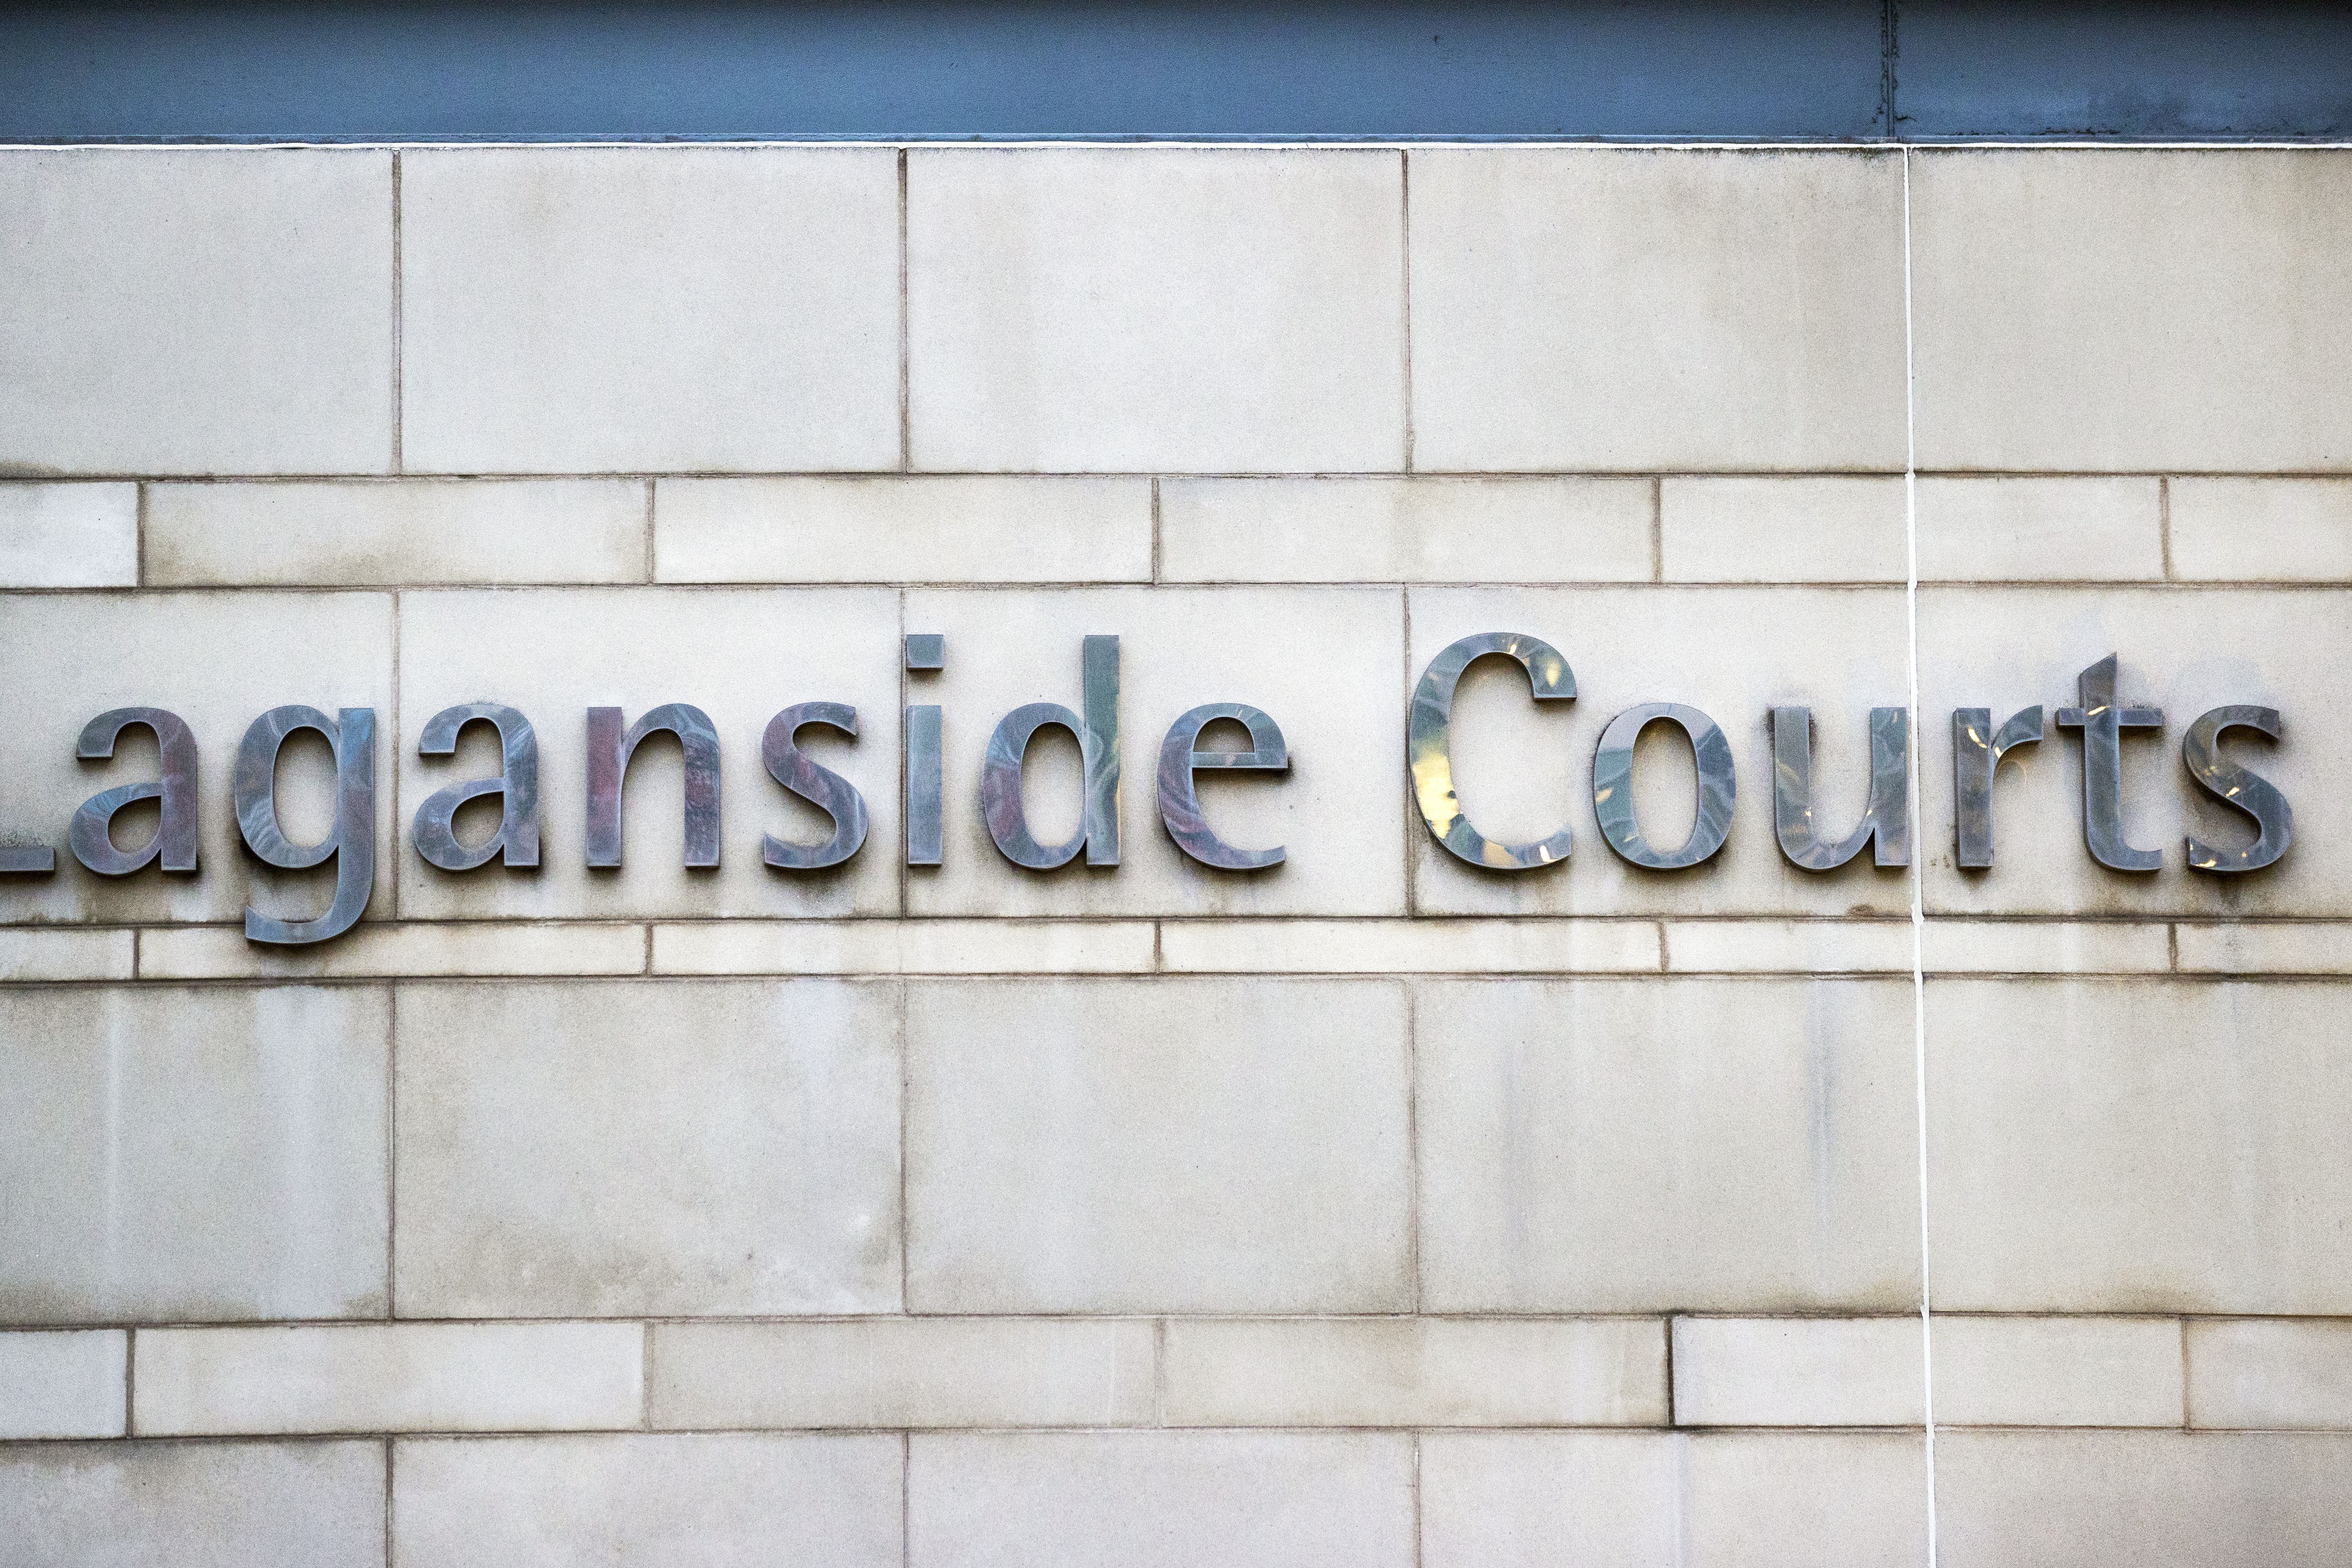 Stock image of the sign for Laganside Court in Belfast, Northern Ireland (Liam McBurney/PA)